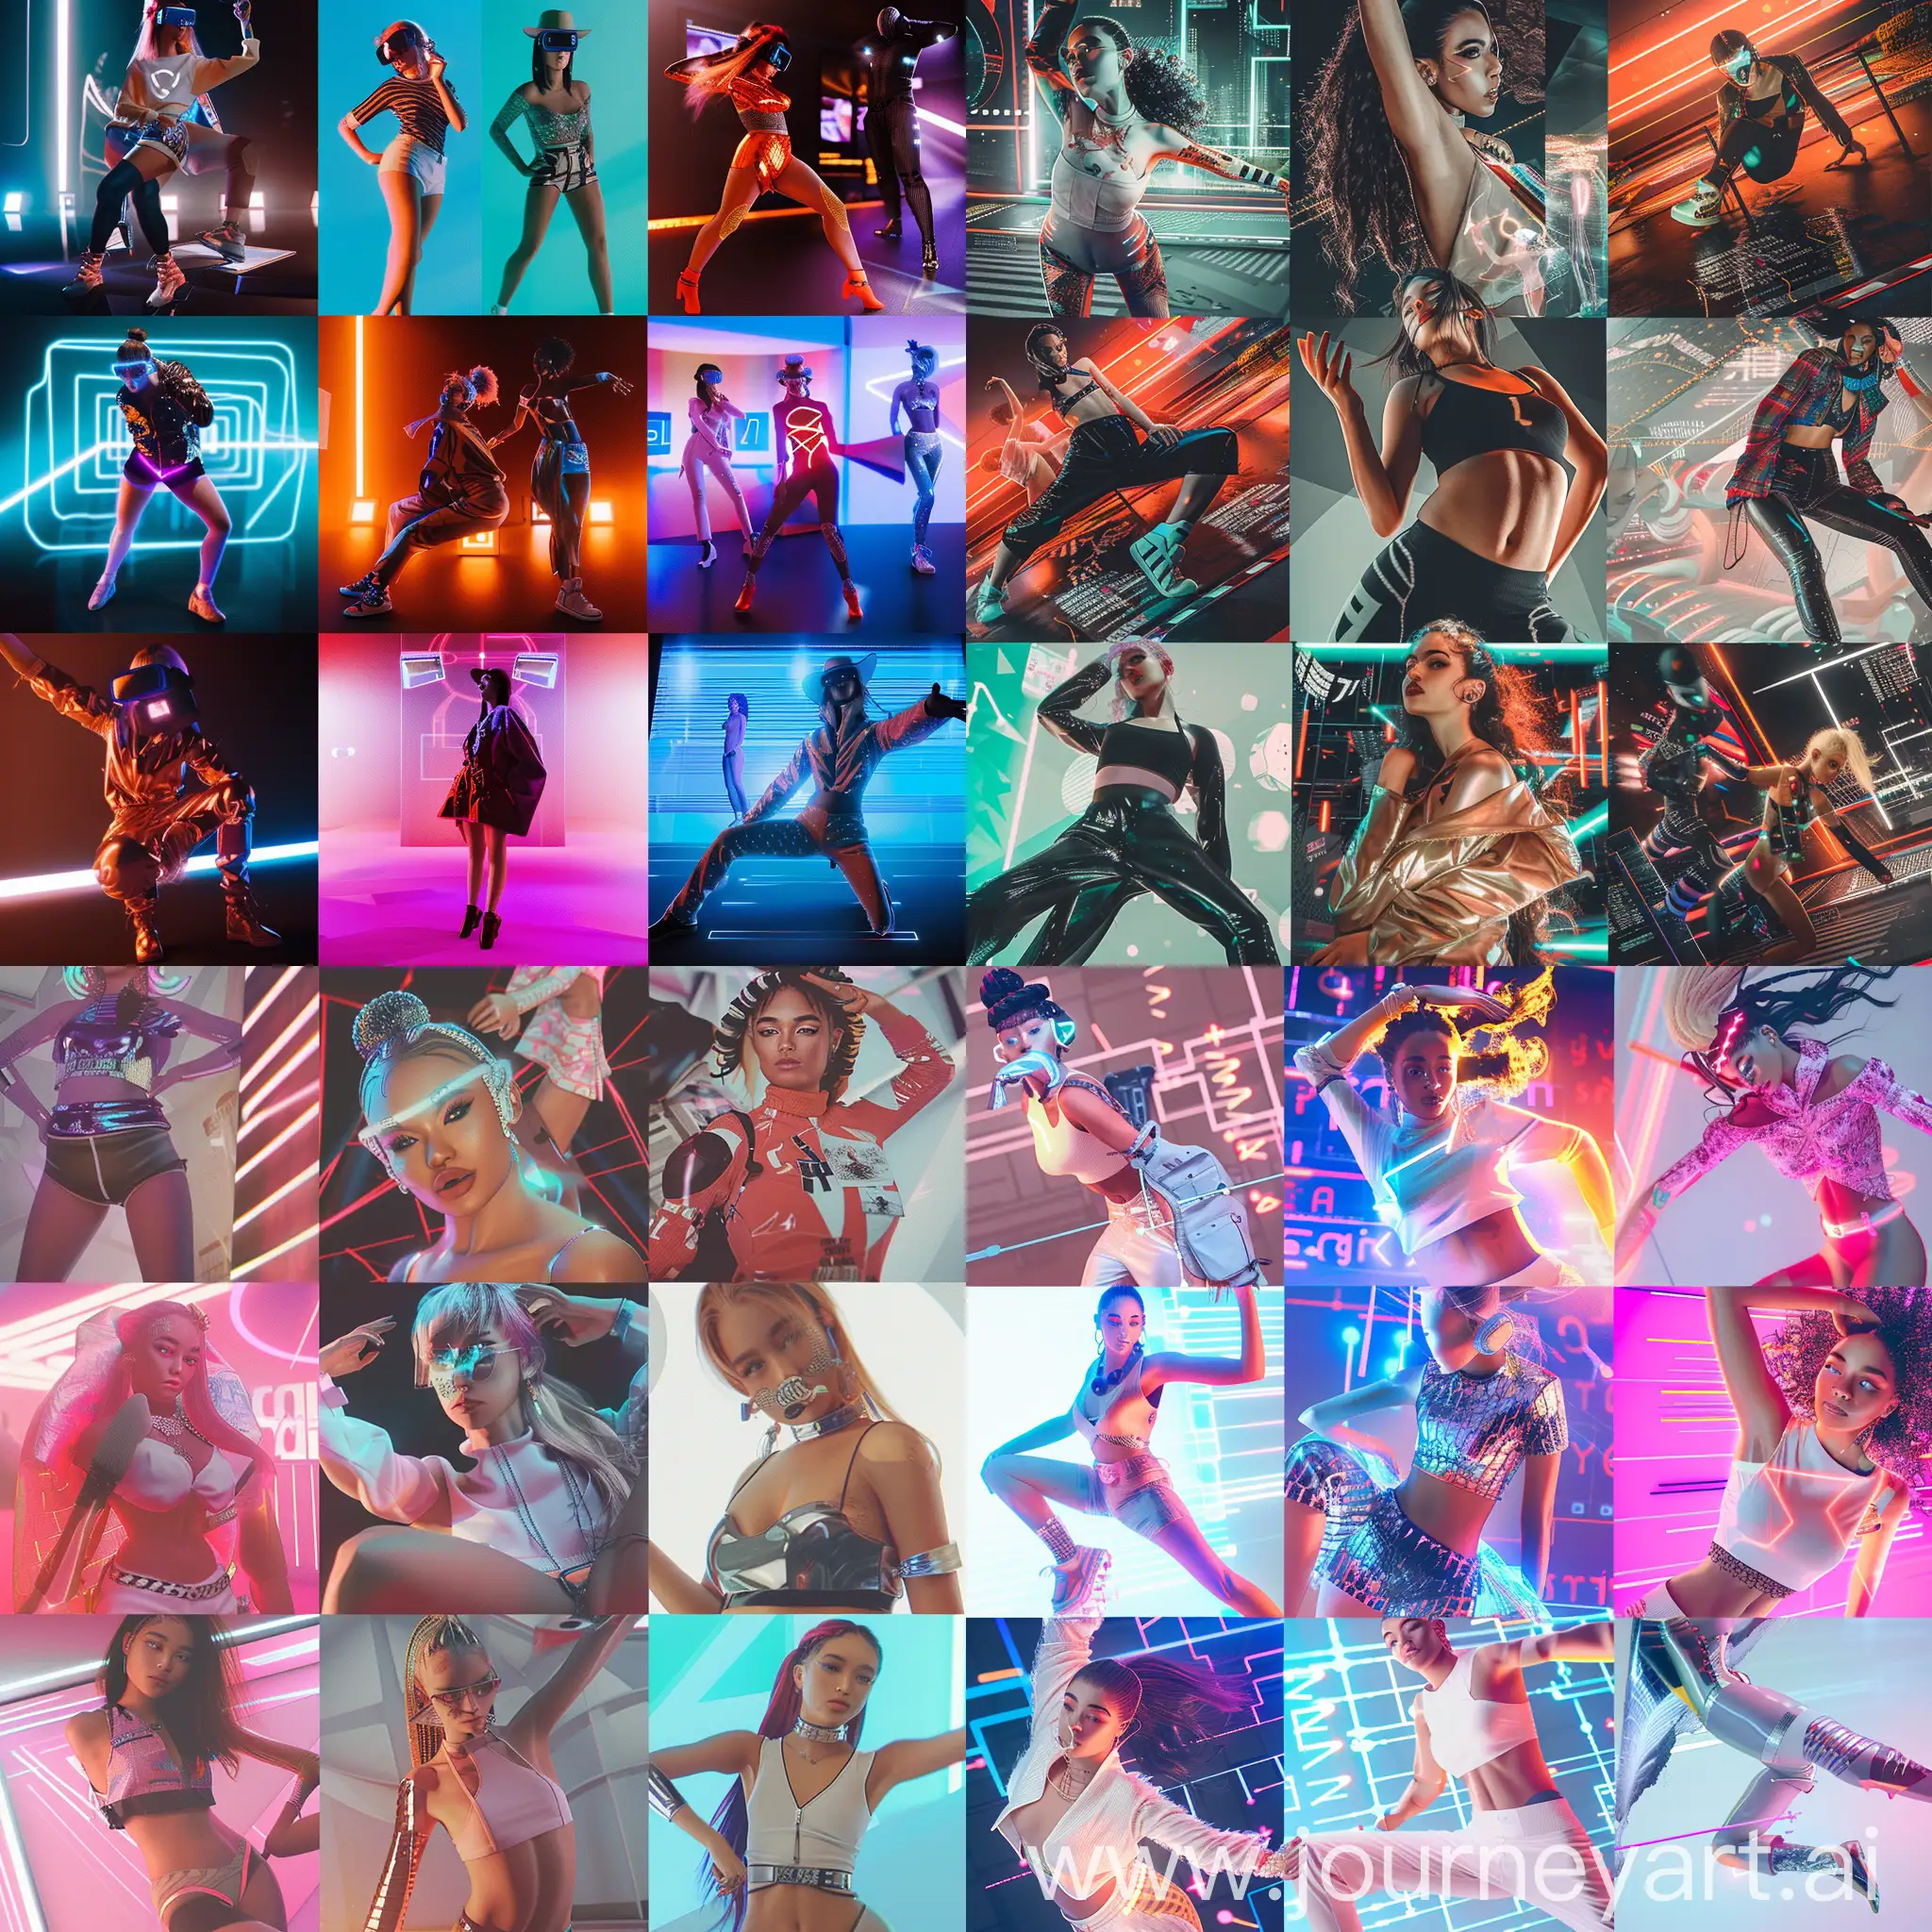 A collage featuring various virtual influencers in dynamic poses, showcasing their diverse styles and the digital environments they inhabit.